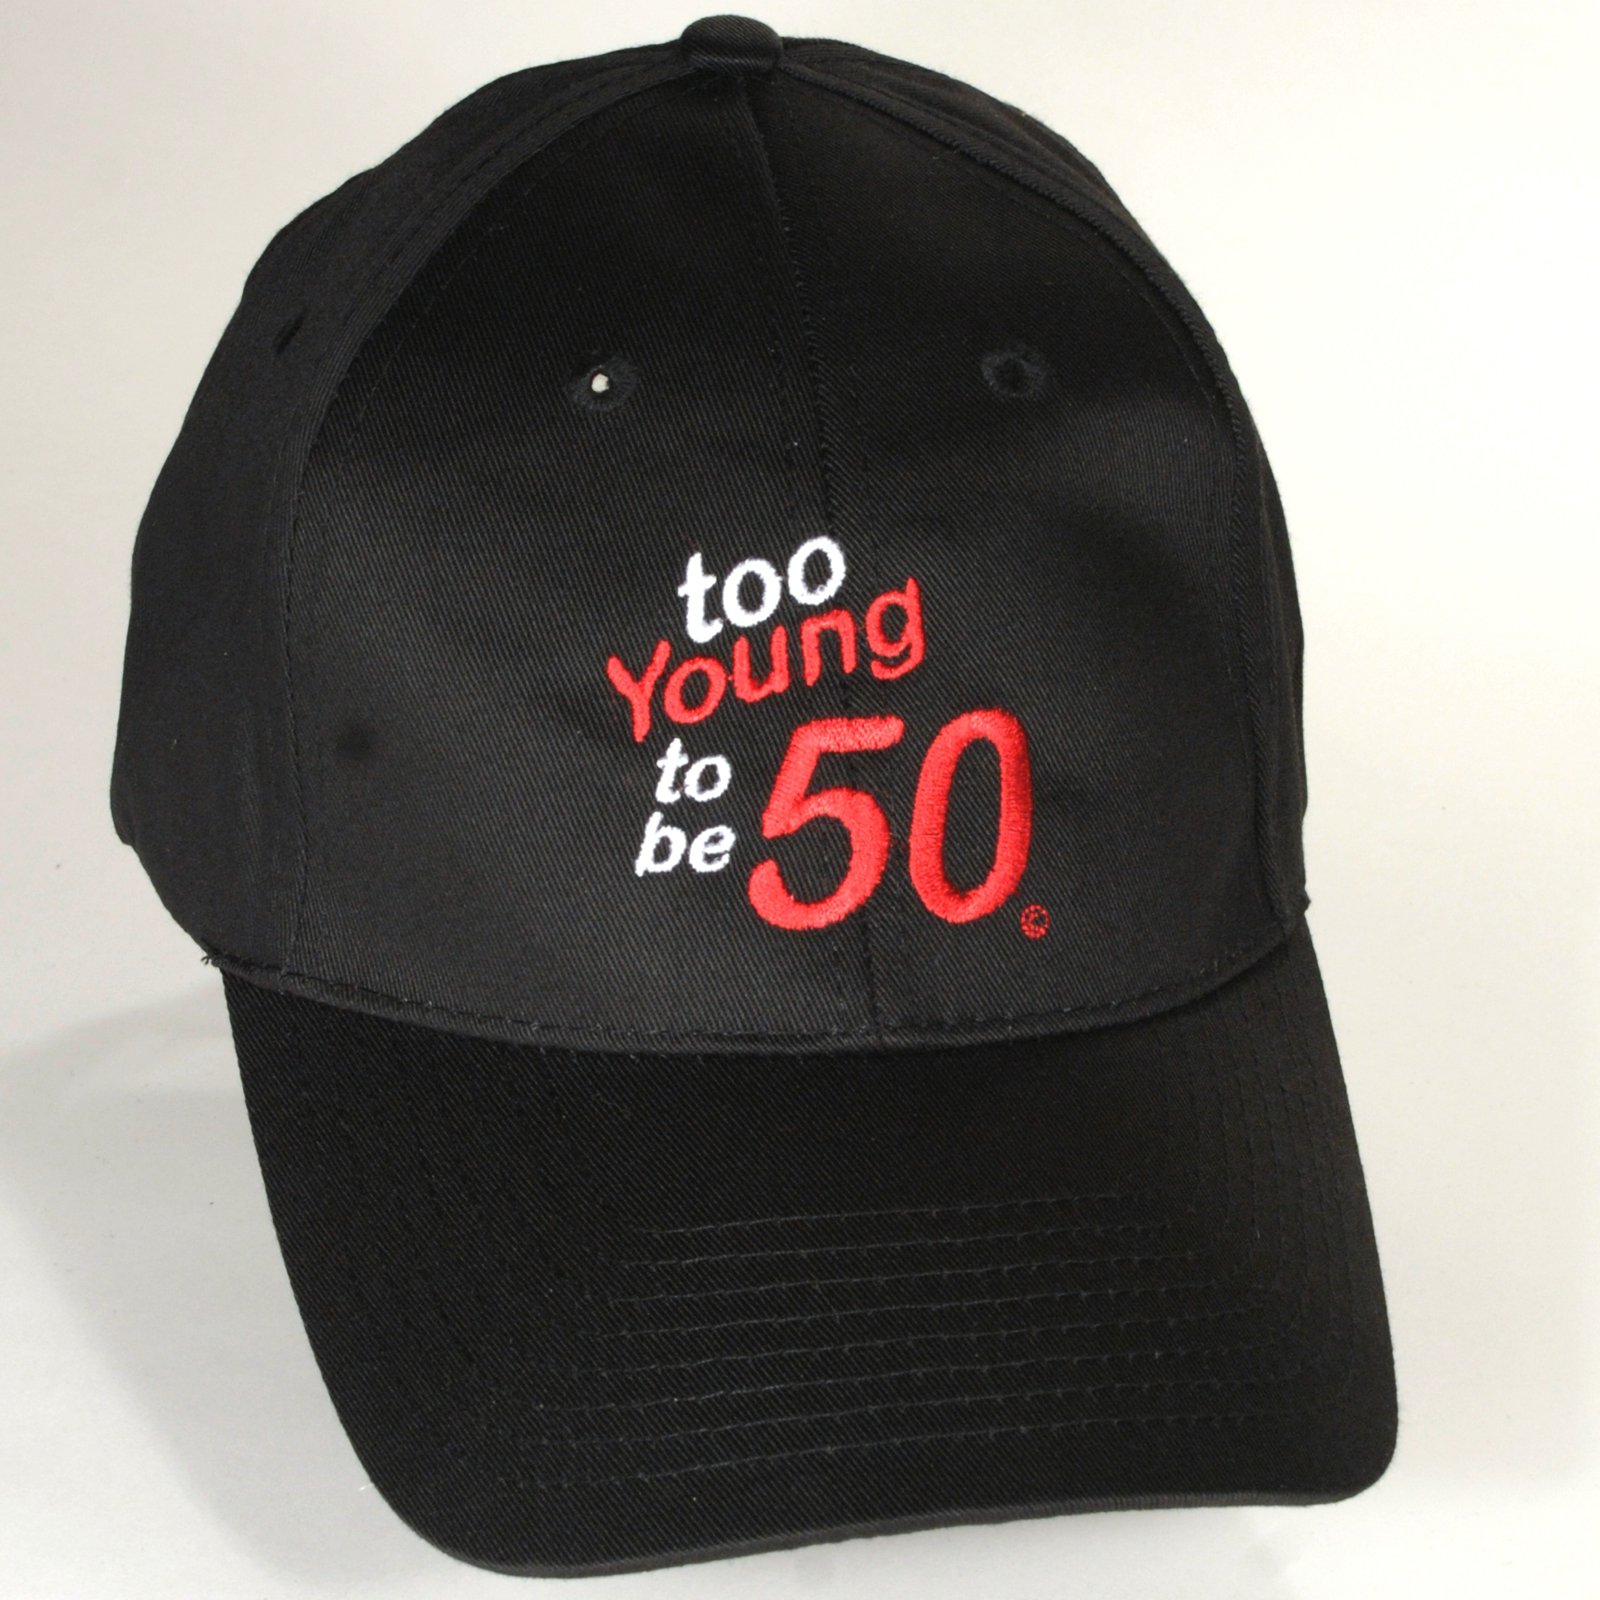 Too Young to be 50 Cap